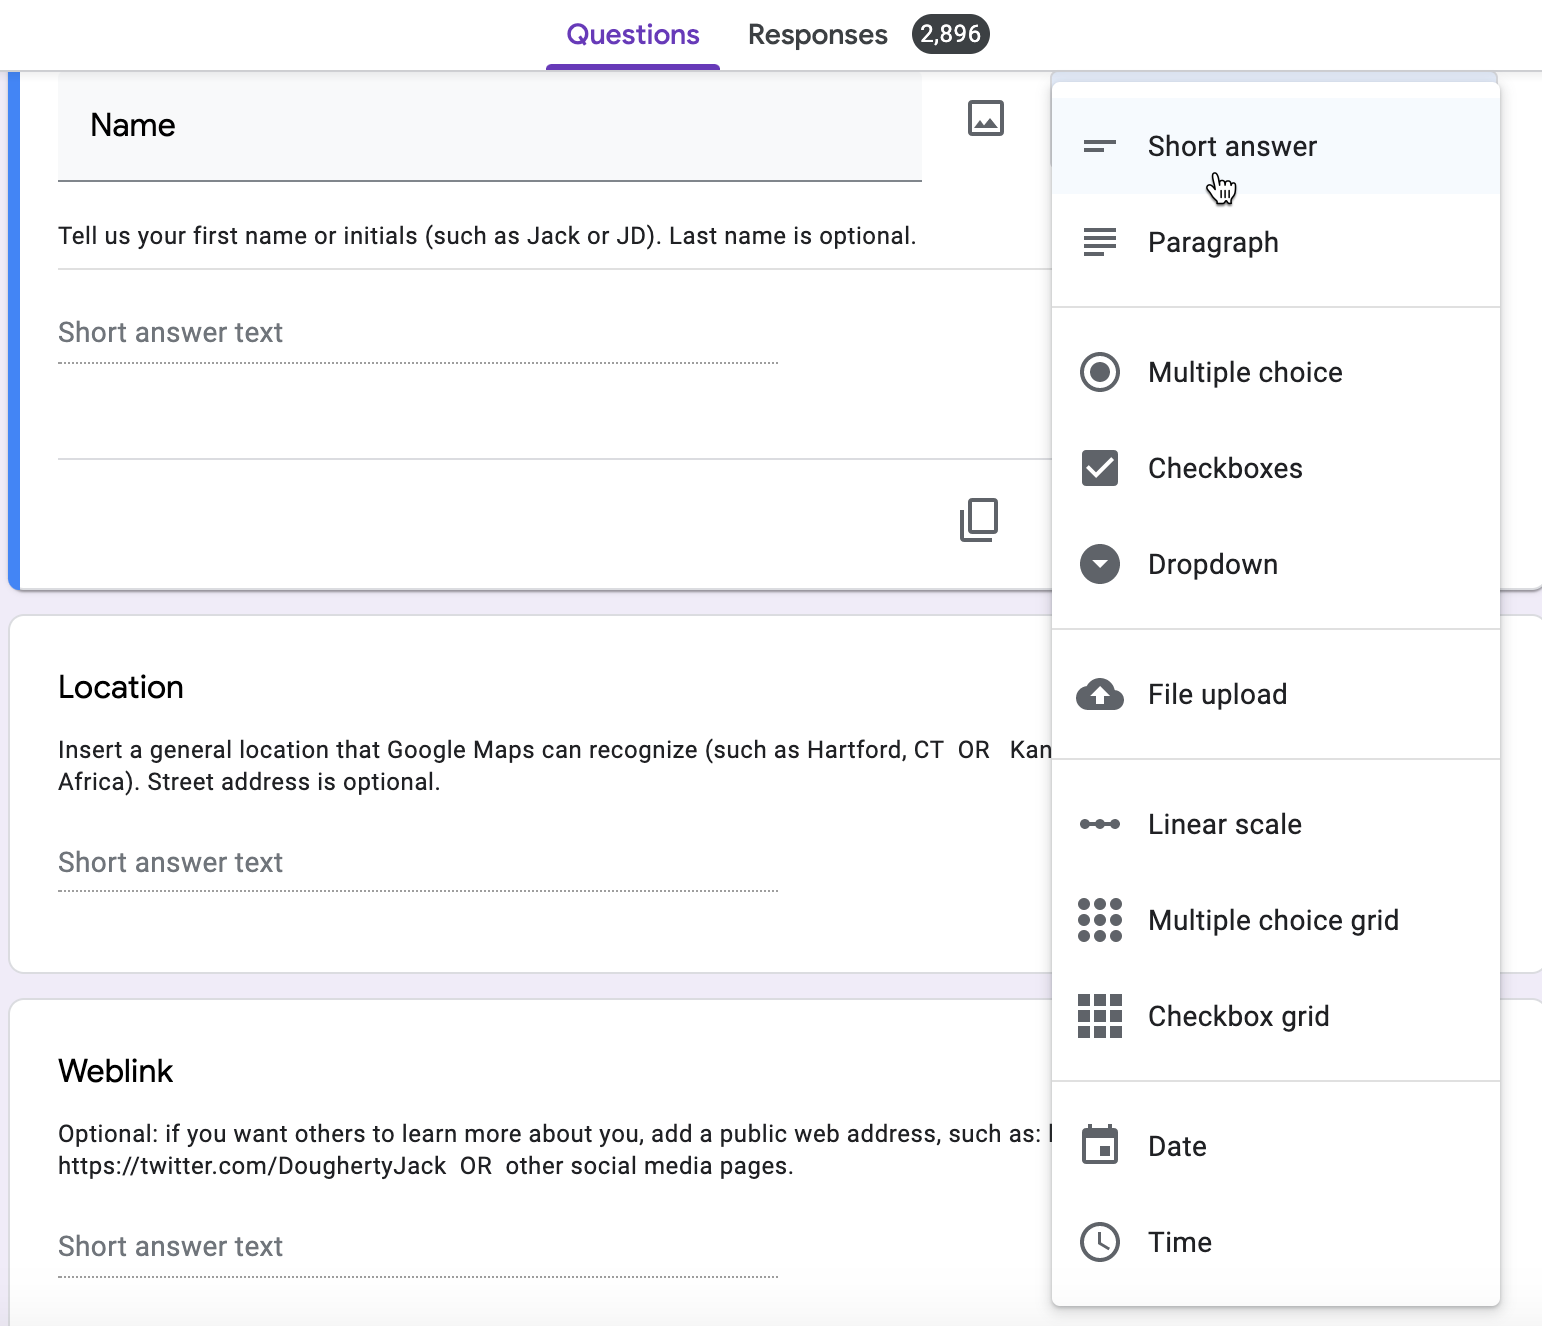 The Google Forms Questions tab allows you to designate different types of responses.